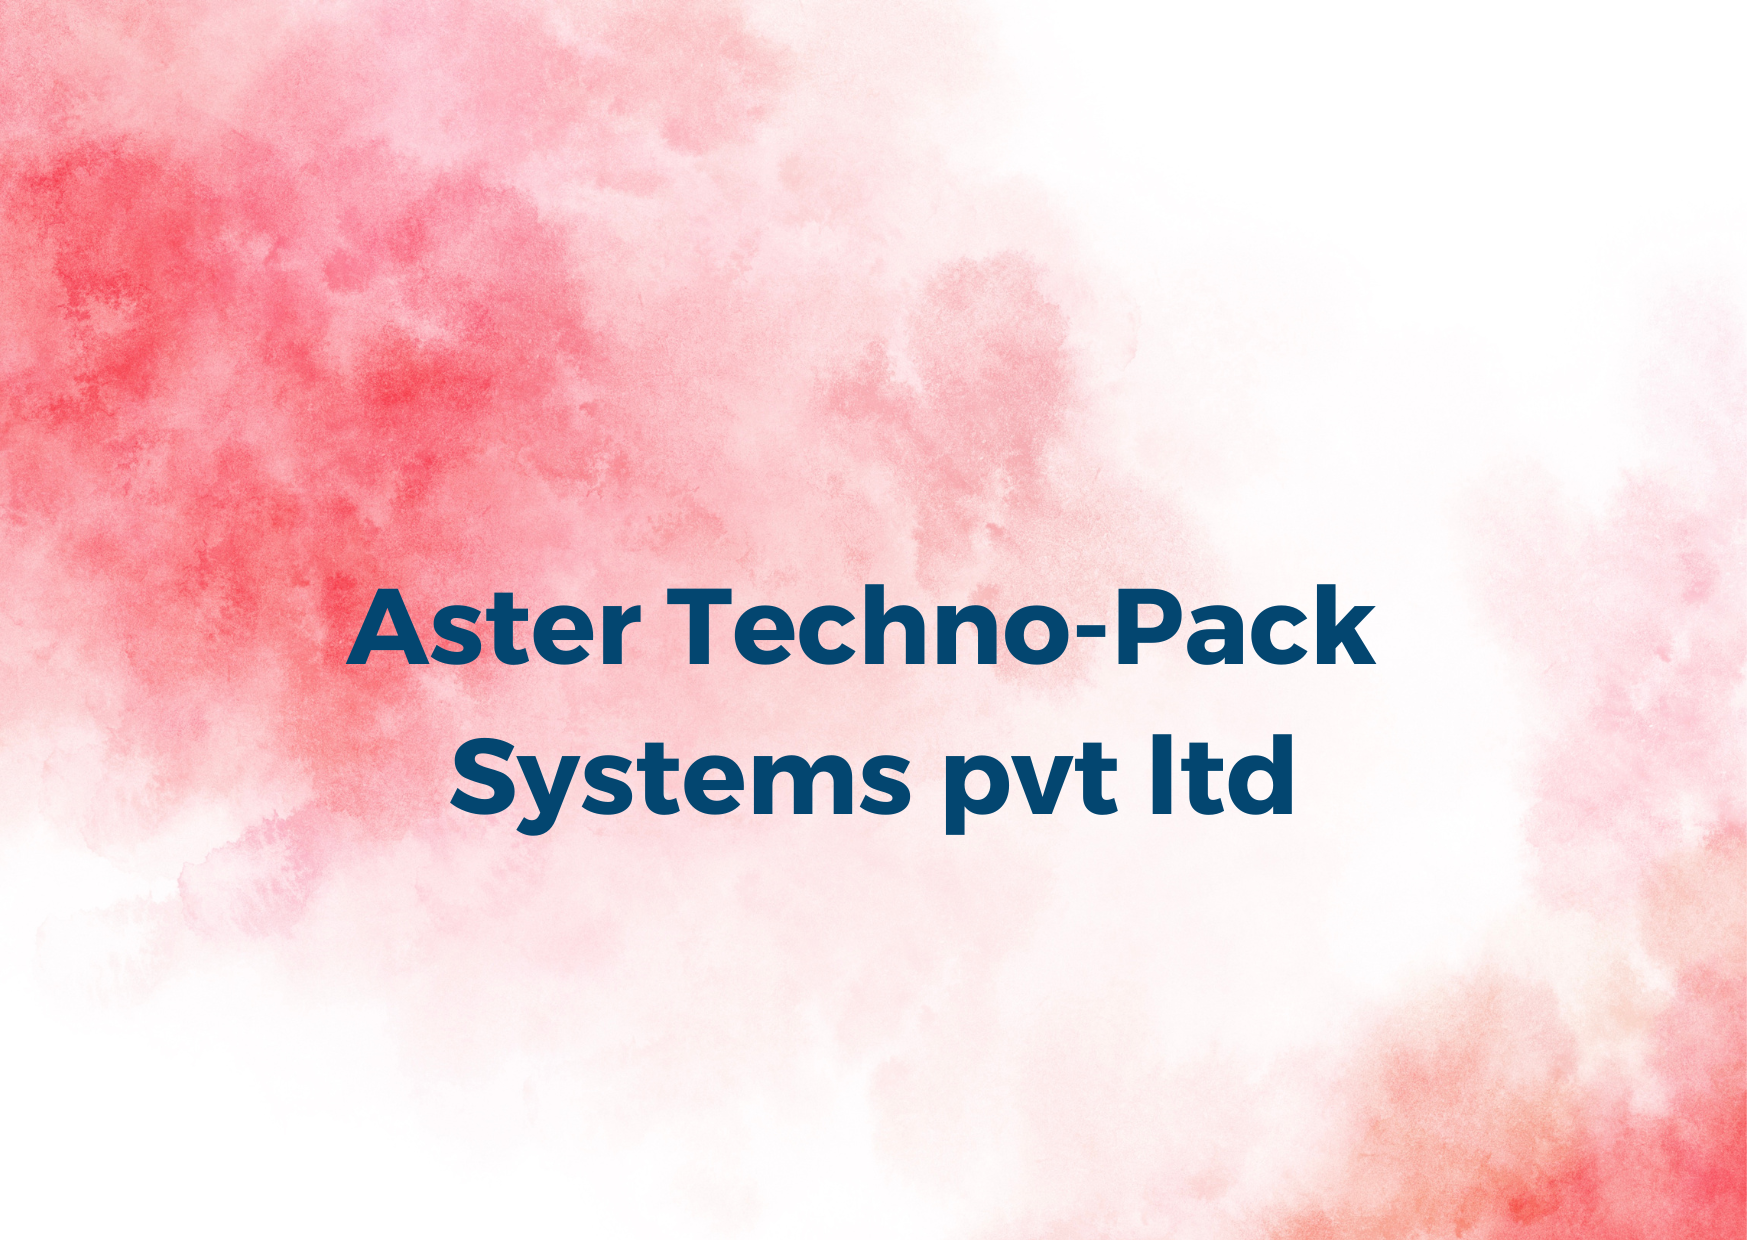 Aster Techno-Pack Systems pvt ltd 